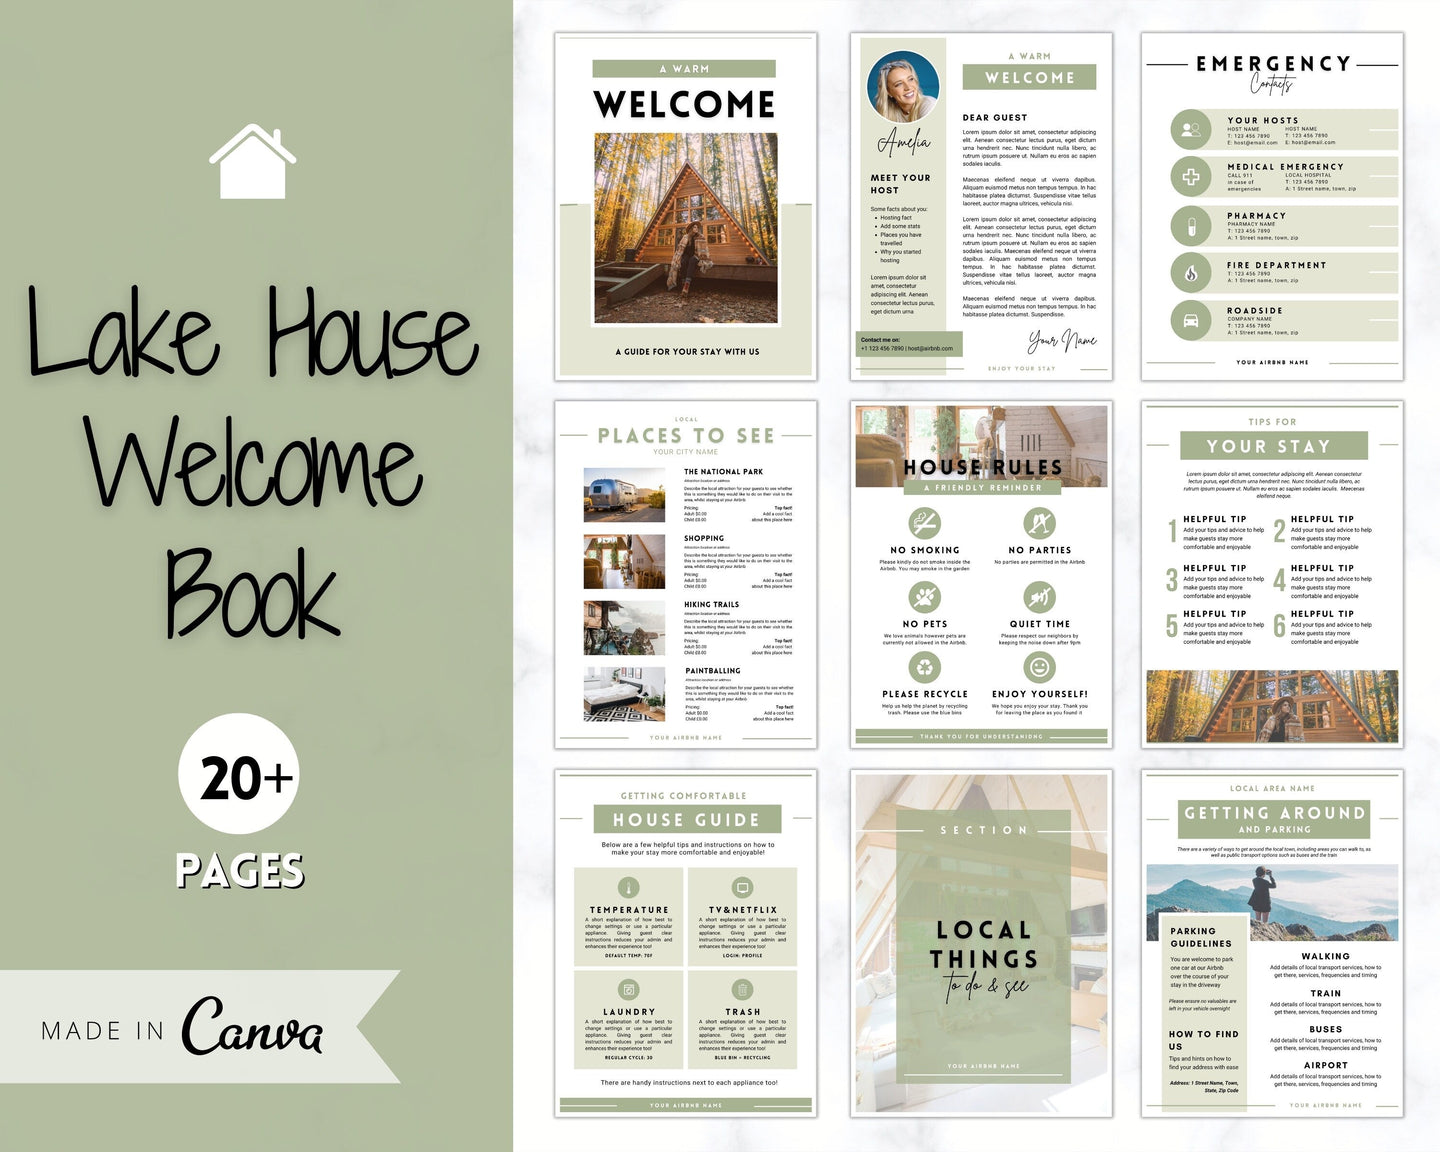 Lake House Welcome Book Template, Editable Canva Airbnb Welcome Guide, Air bnb House manual eBook, Host signs, Signage, VRBO Vacation Rental | Green